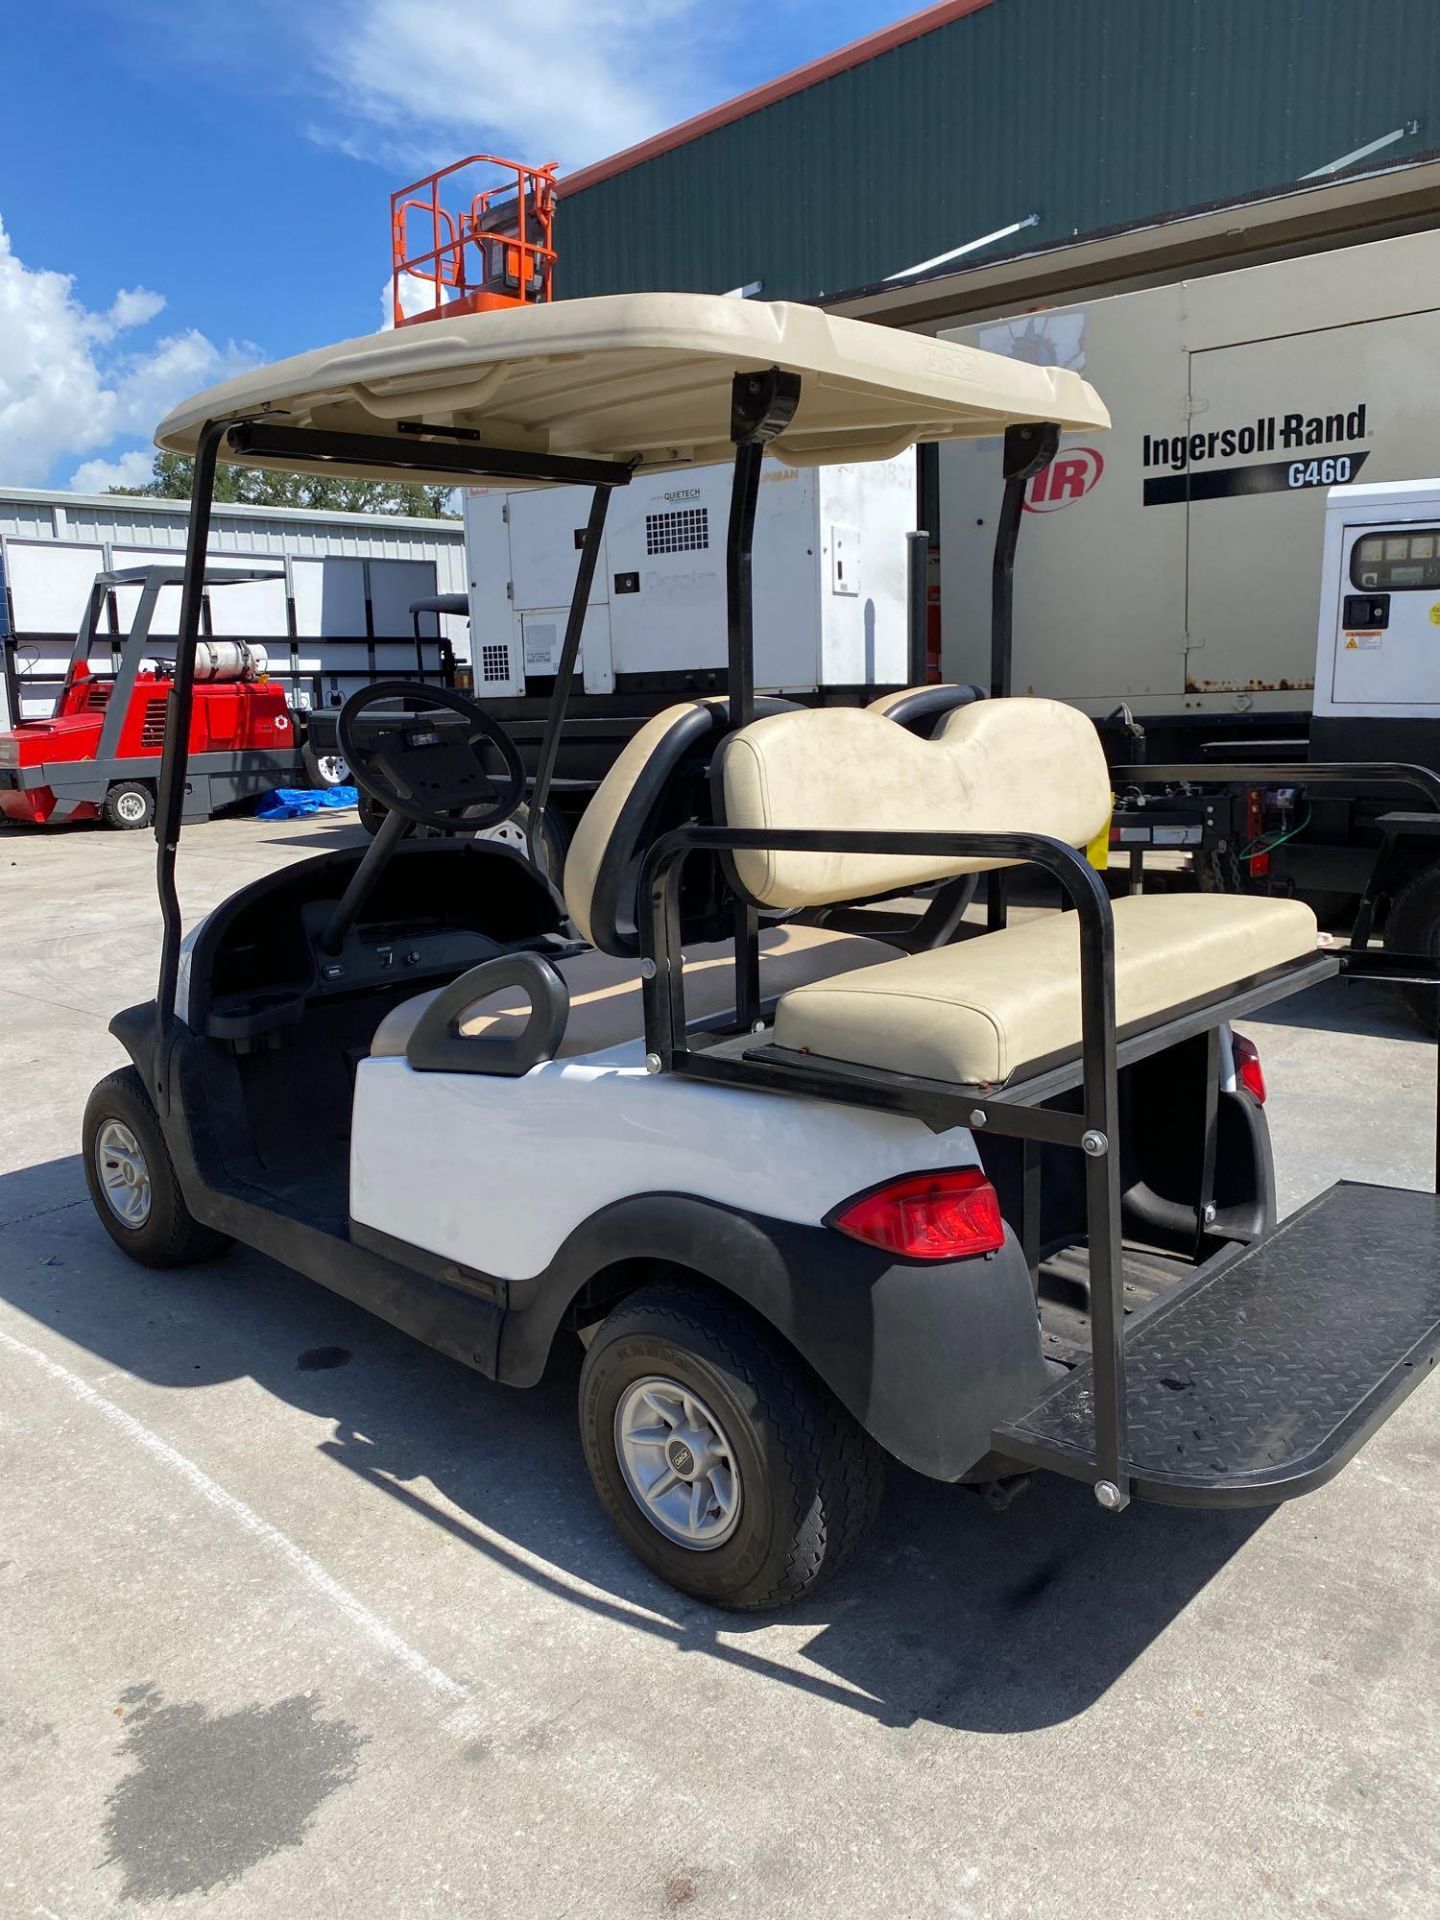 CLUB CAR ELECTRIC 4-SEATER GOLF CART, BATTERY CHARGER INCLUDED - Image 14 of 16